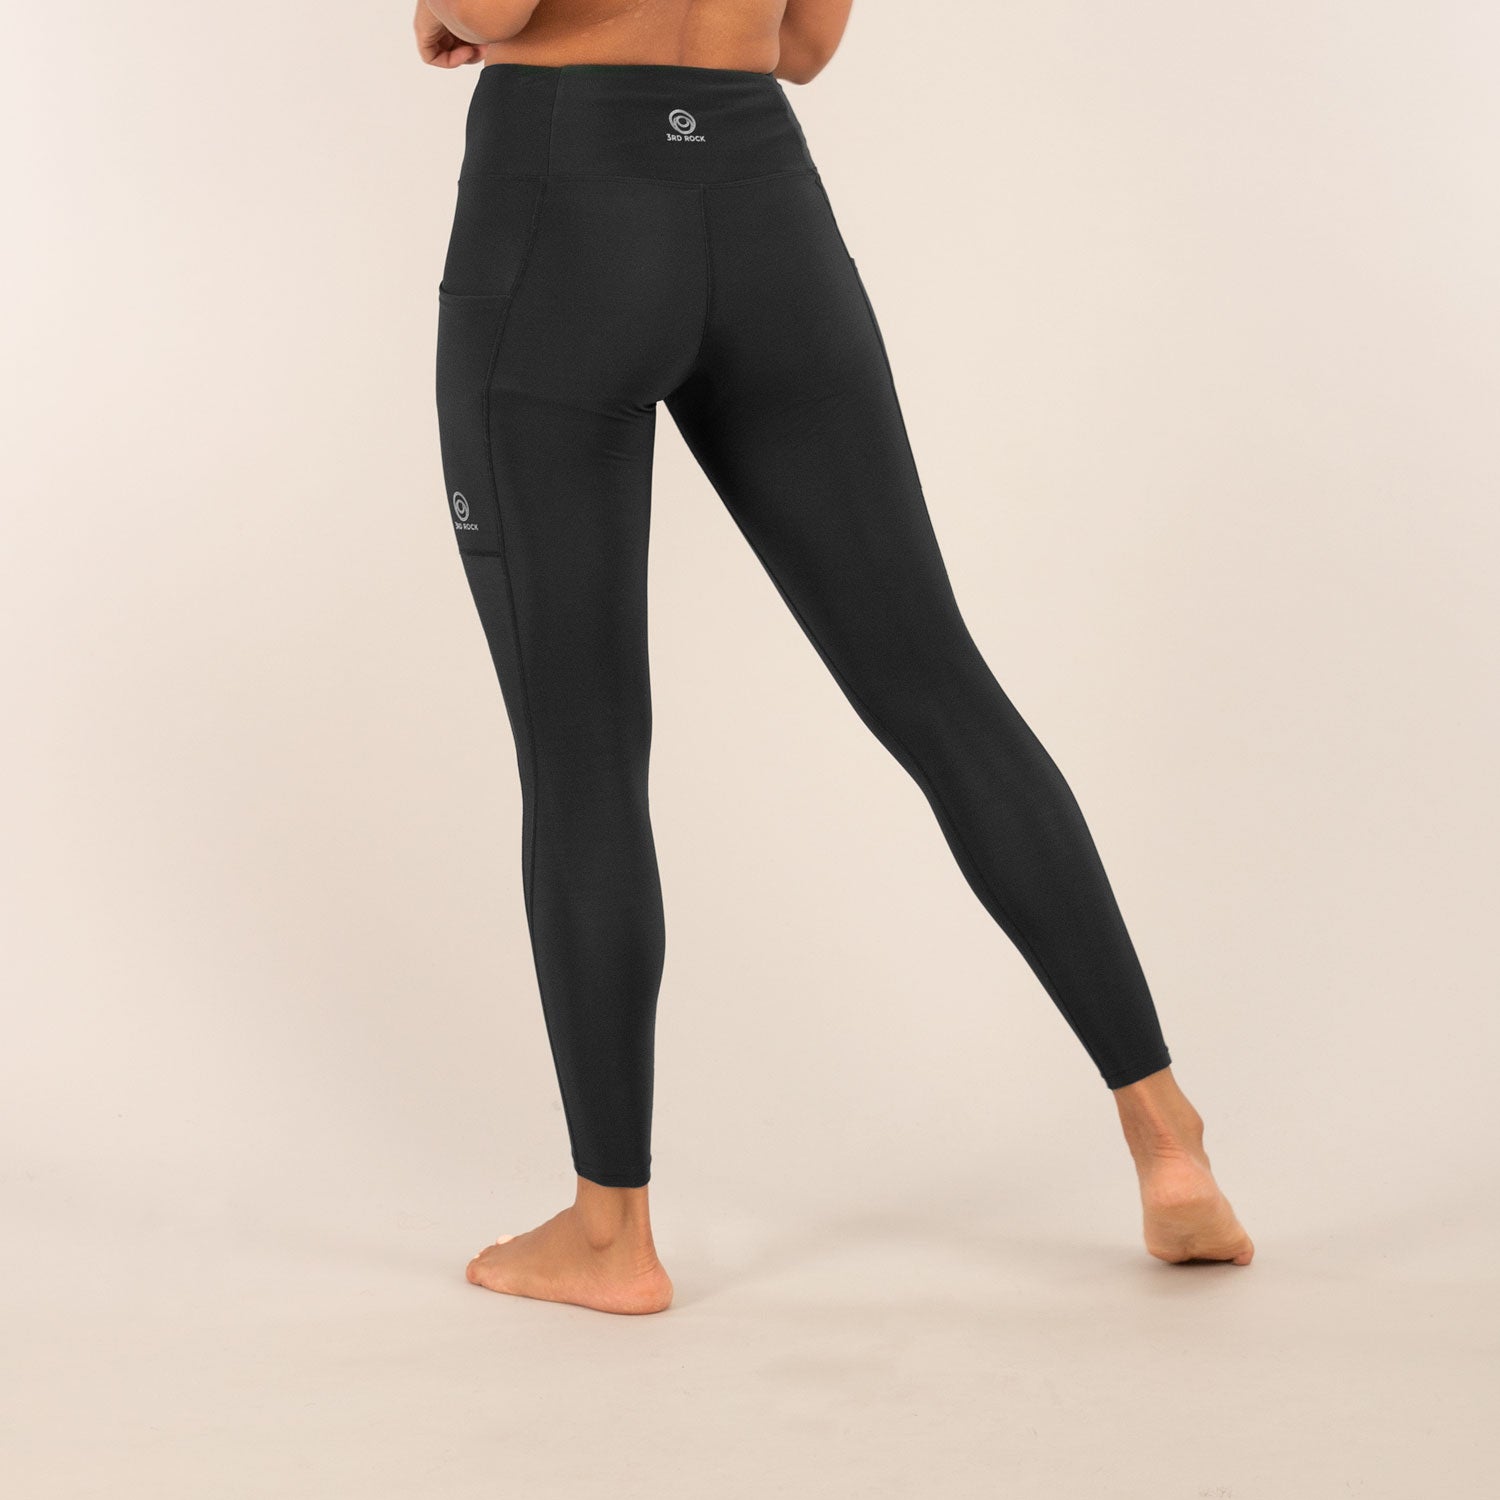 DAPHNE Leggings | Women's Thermal Daphne Leggings | 3RD ROCK Clothing -  Kendal is 5ft 7 with a 28" waist, 38" hips and wears a size 12/RL. F